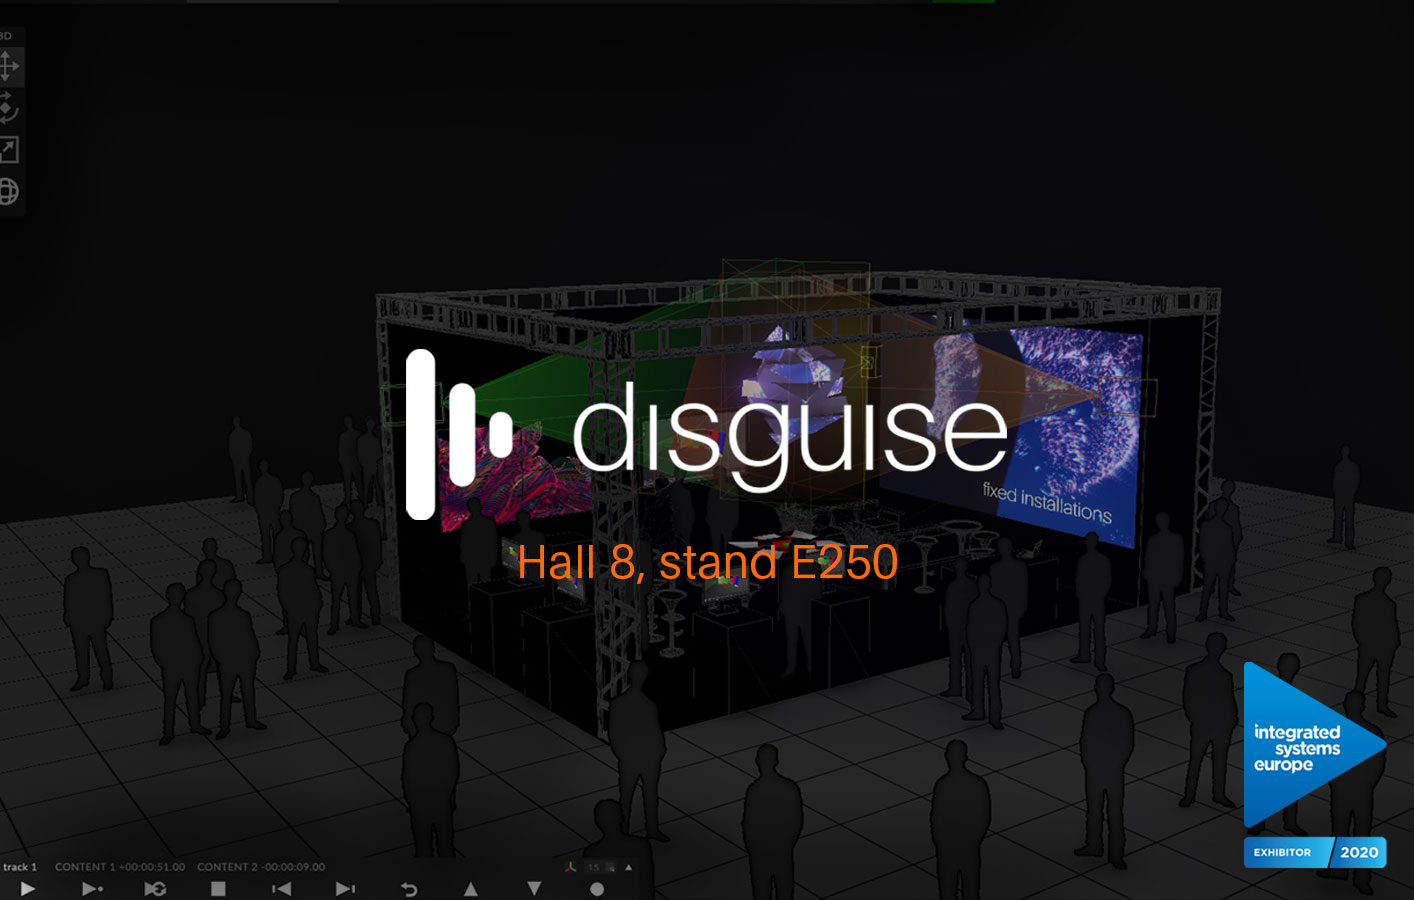 disguise to showcase integrated solutions at ISE 2020